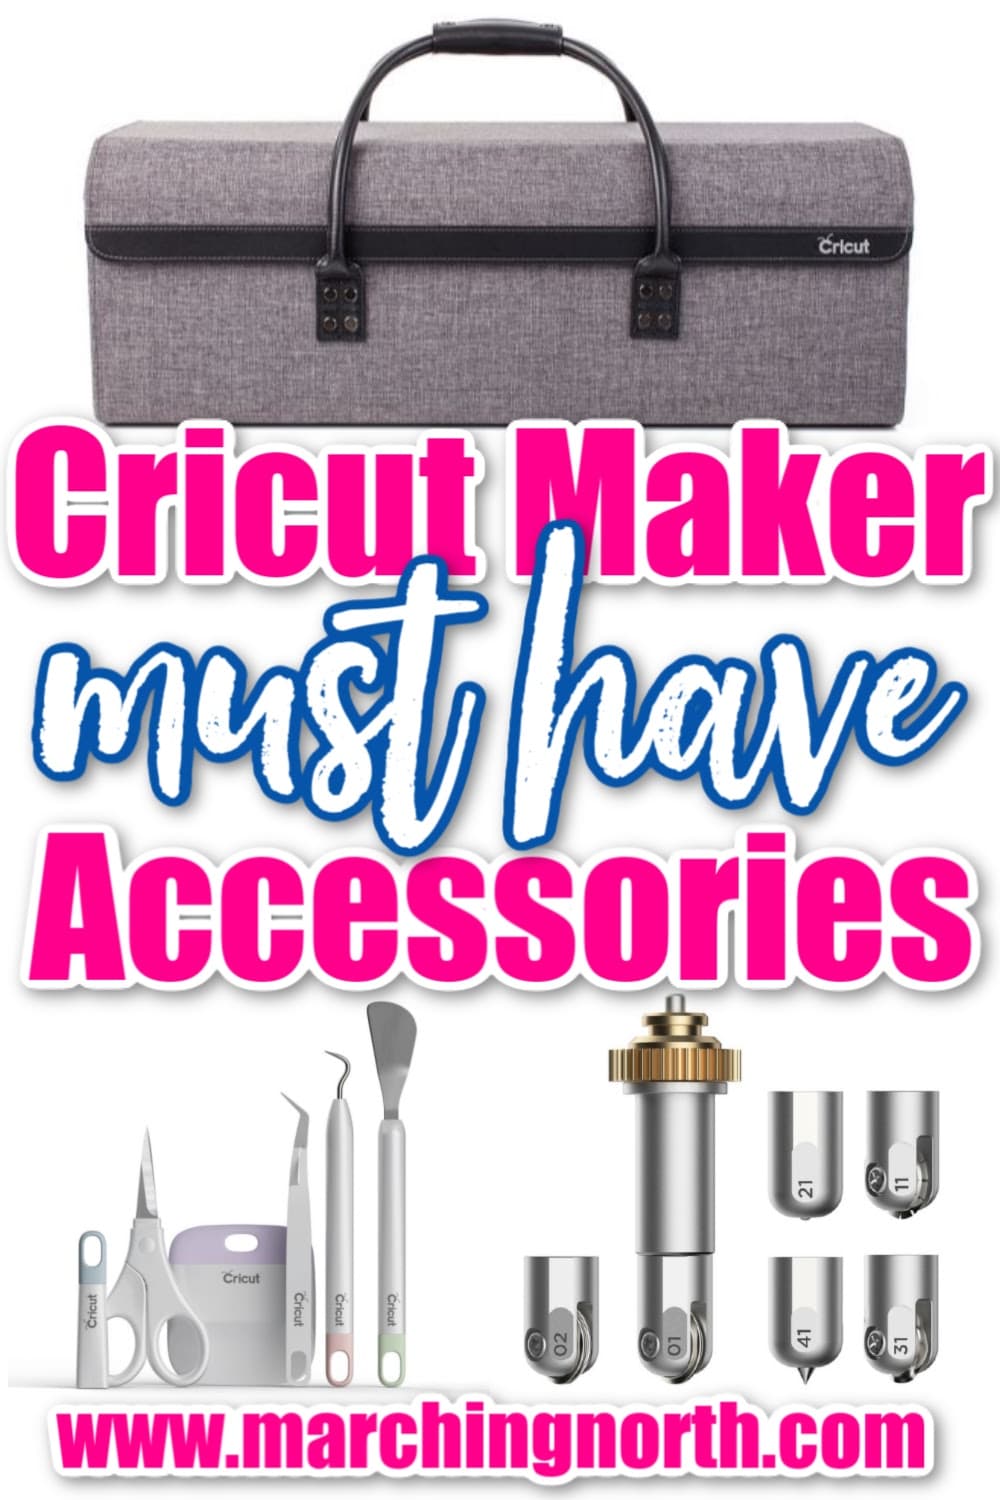 Explore Air Ultimate Accessories Bundle Compatible with All Cricut Makers Incl Perfect Tools to Enjoy Your Crafting Journey The All Incl Kit for Beginners or Skilled Craft Lovers 